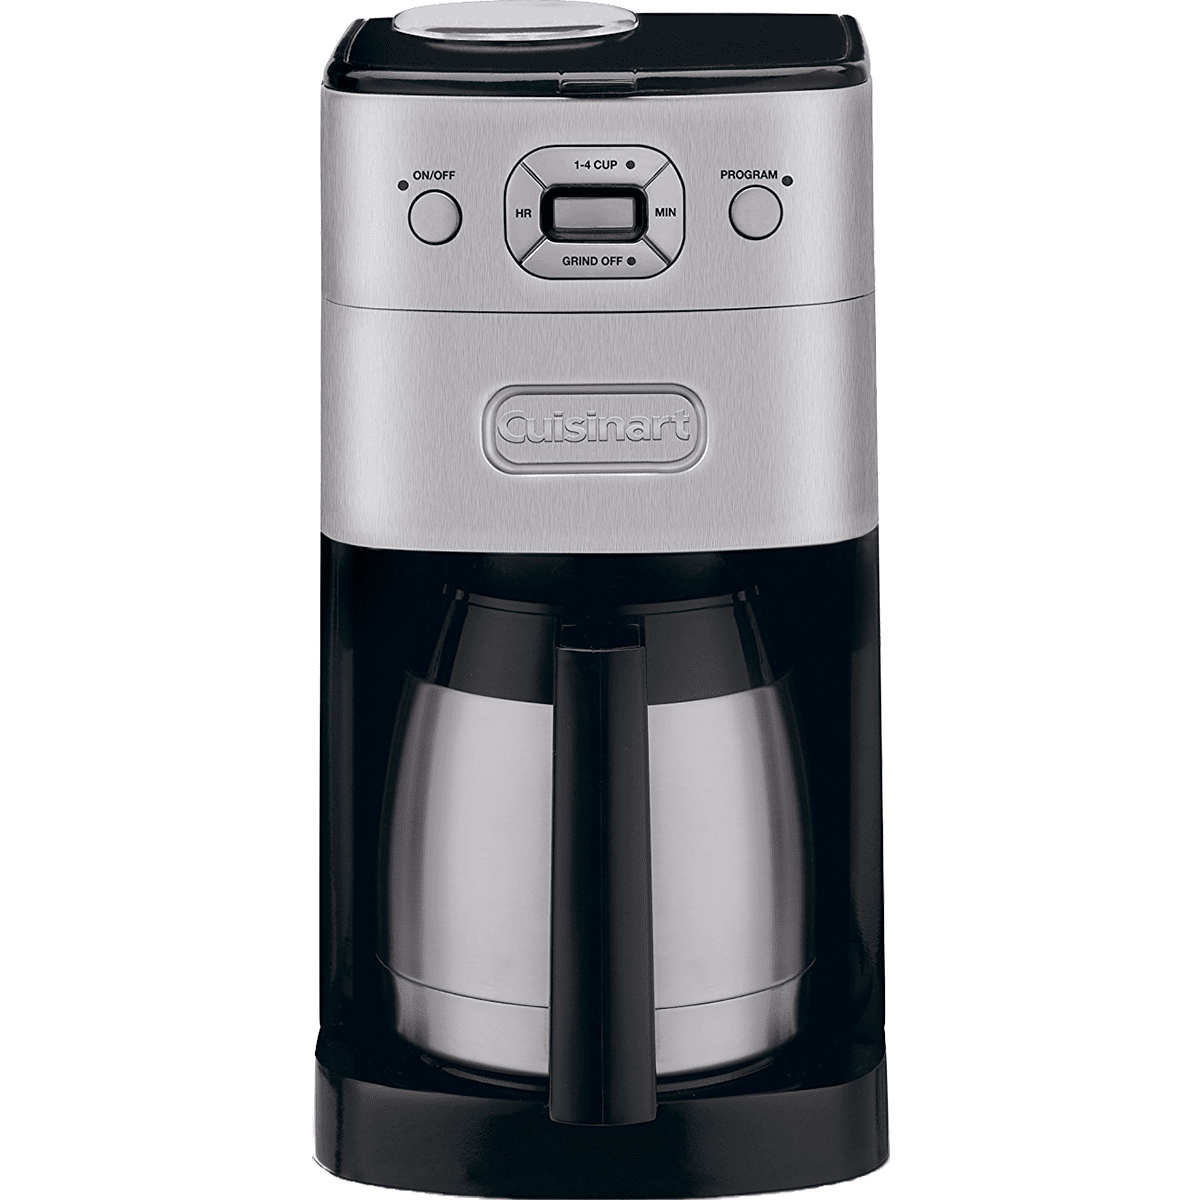 Cuisinart Grind & Brew 12 Cup Automatic Coffee Maker (DGB-625BC)